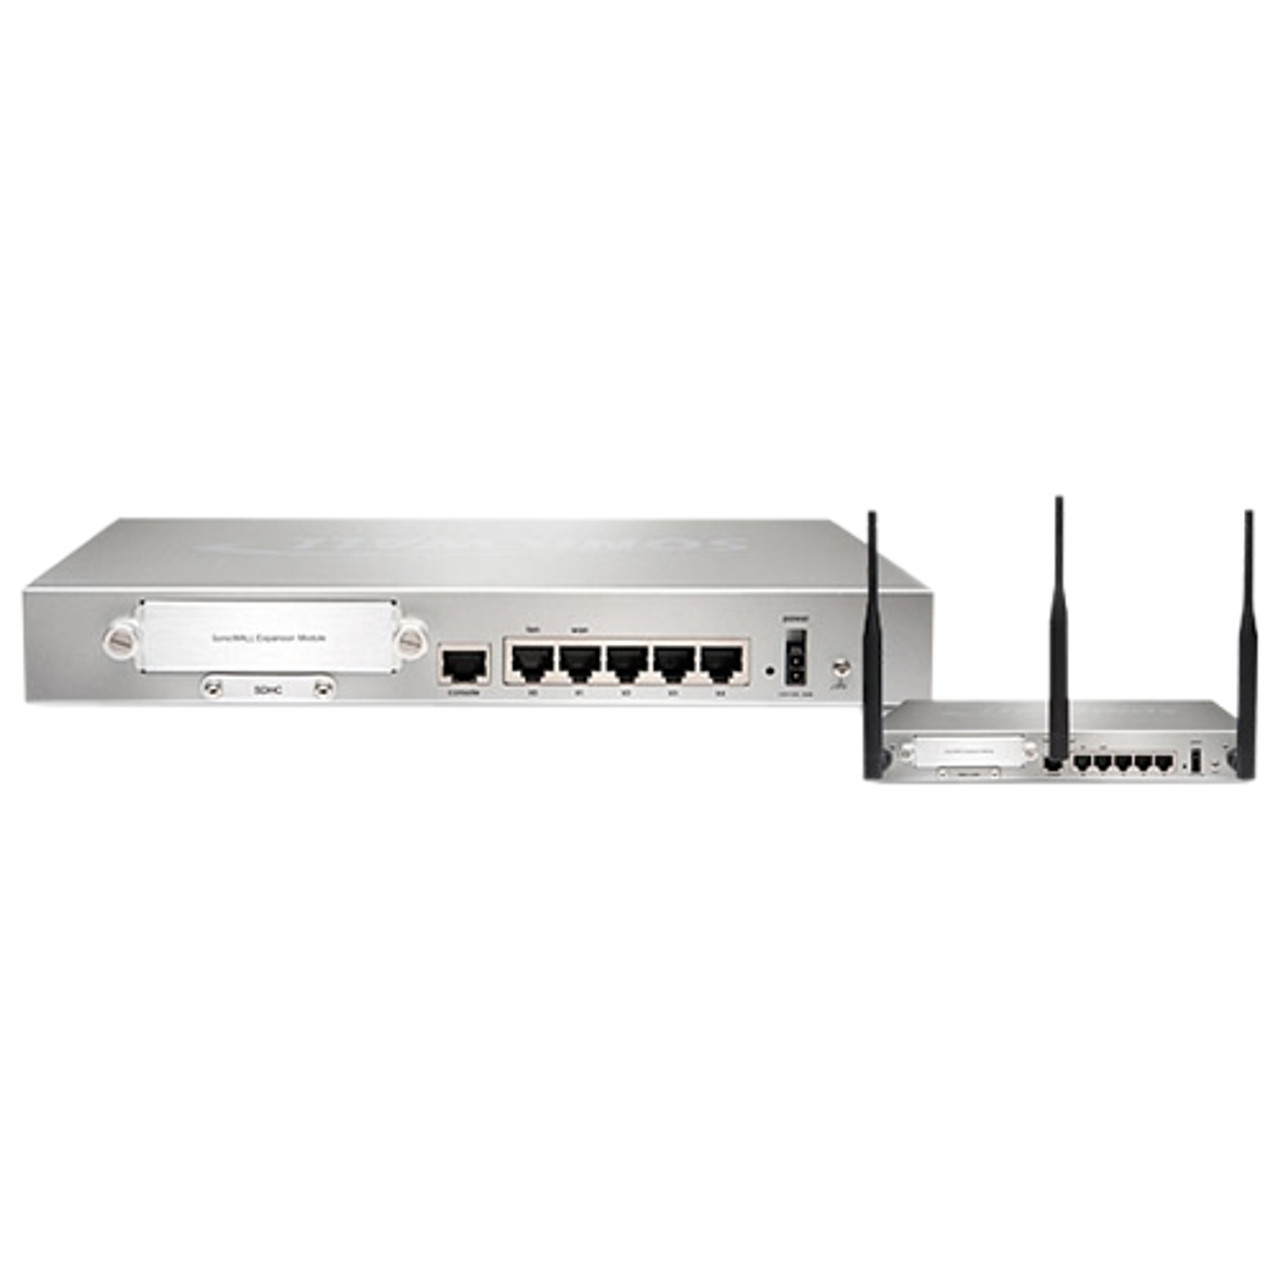 01-SSC-9747 SonicWALL Network Security Appliance 250m Totalsecure (Refurbished)